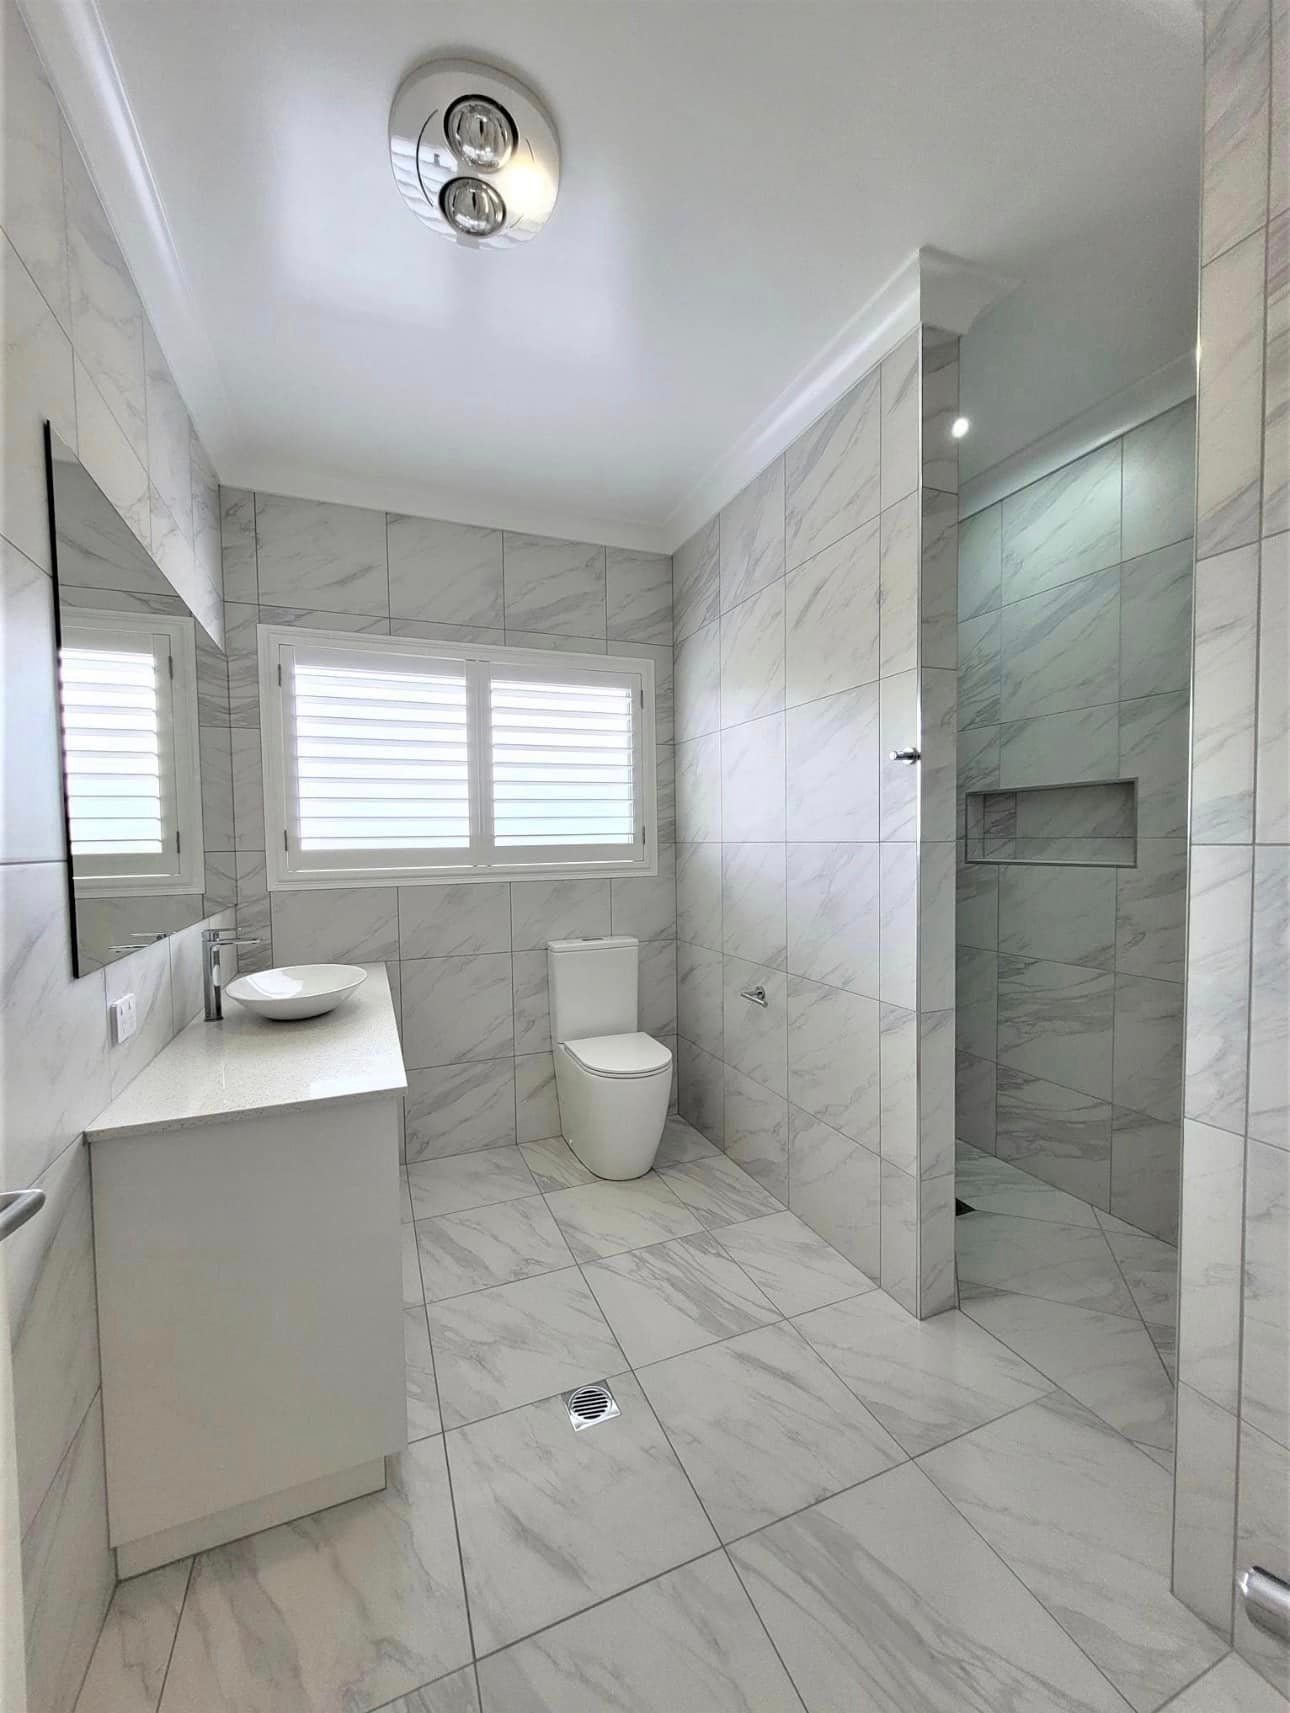 Brand New Bathroom with a Toilet, Sink, Mirror, and Shower — Waterproofing Solutions in Toowoomba, QLD